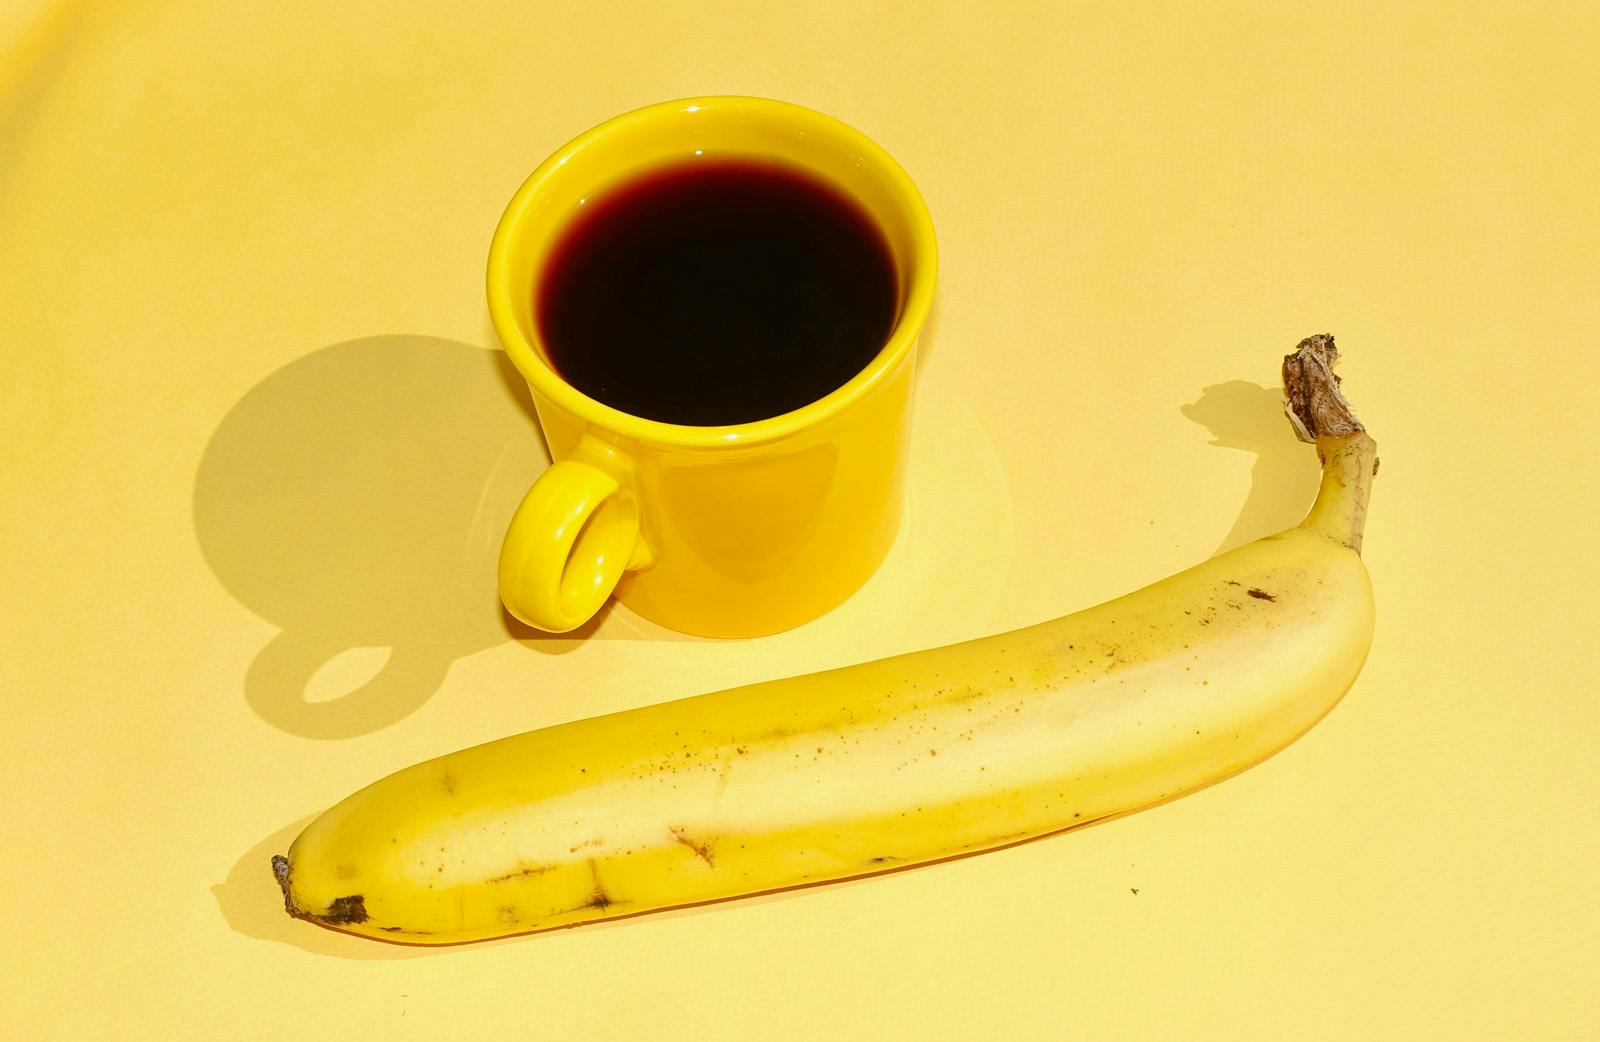 a yellow fiestaware mug of yes plz coffee and a banana on a yellow background